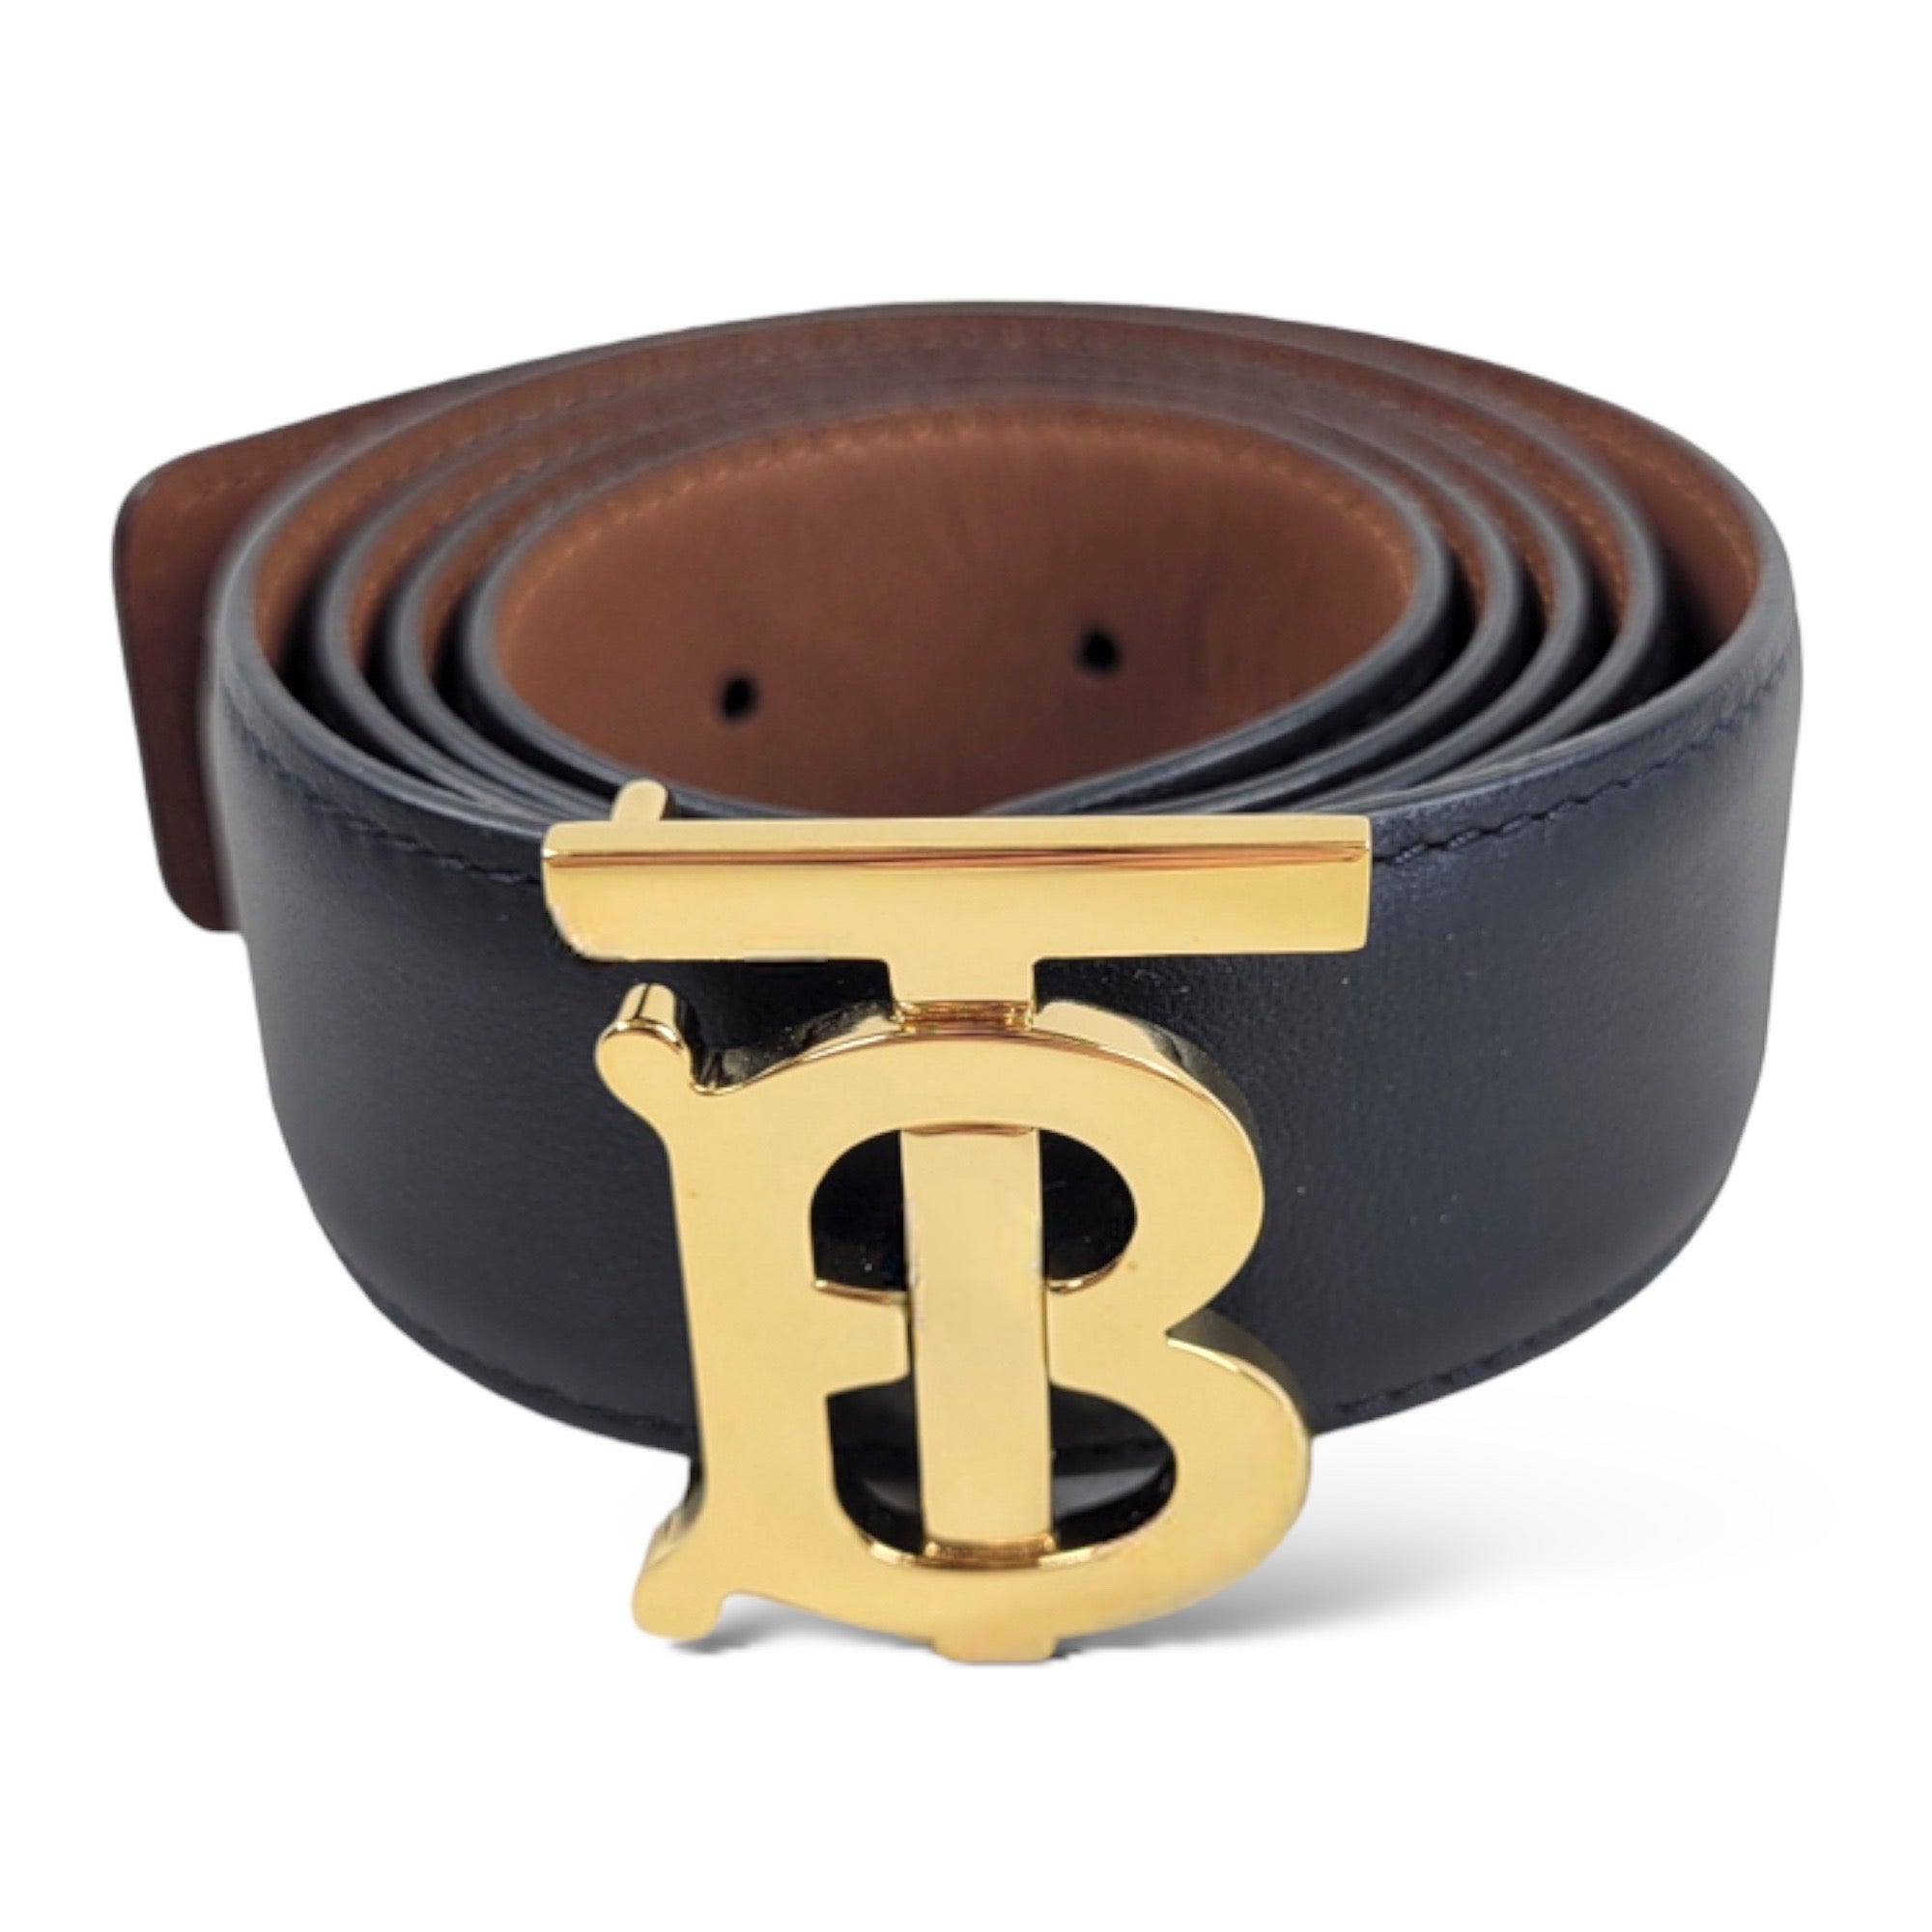 Burberry Gold-Tone TB Logo Buckle Reversible Black/Brown Leather Belt (SMALL)